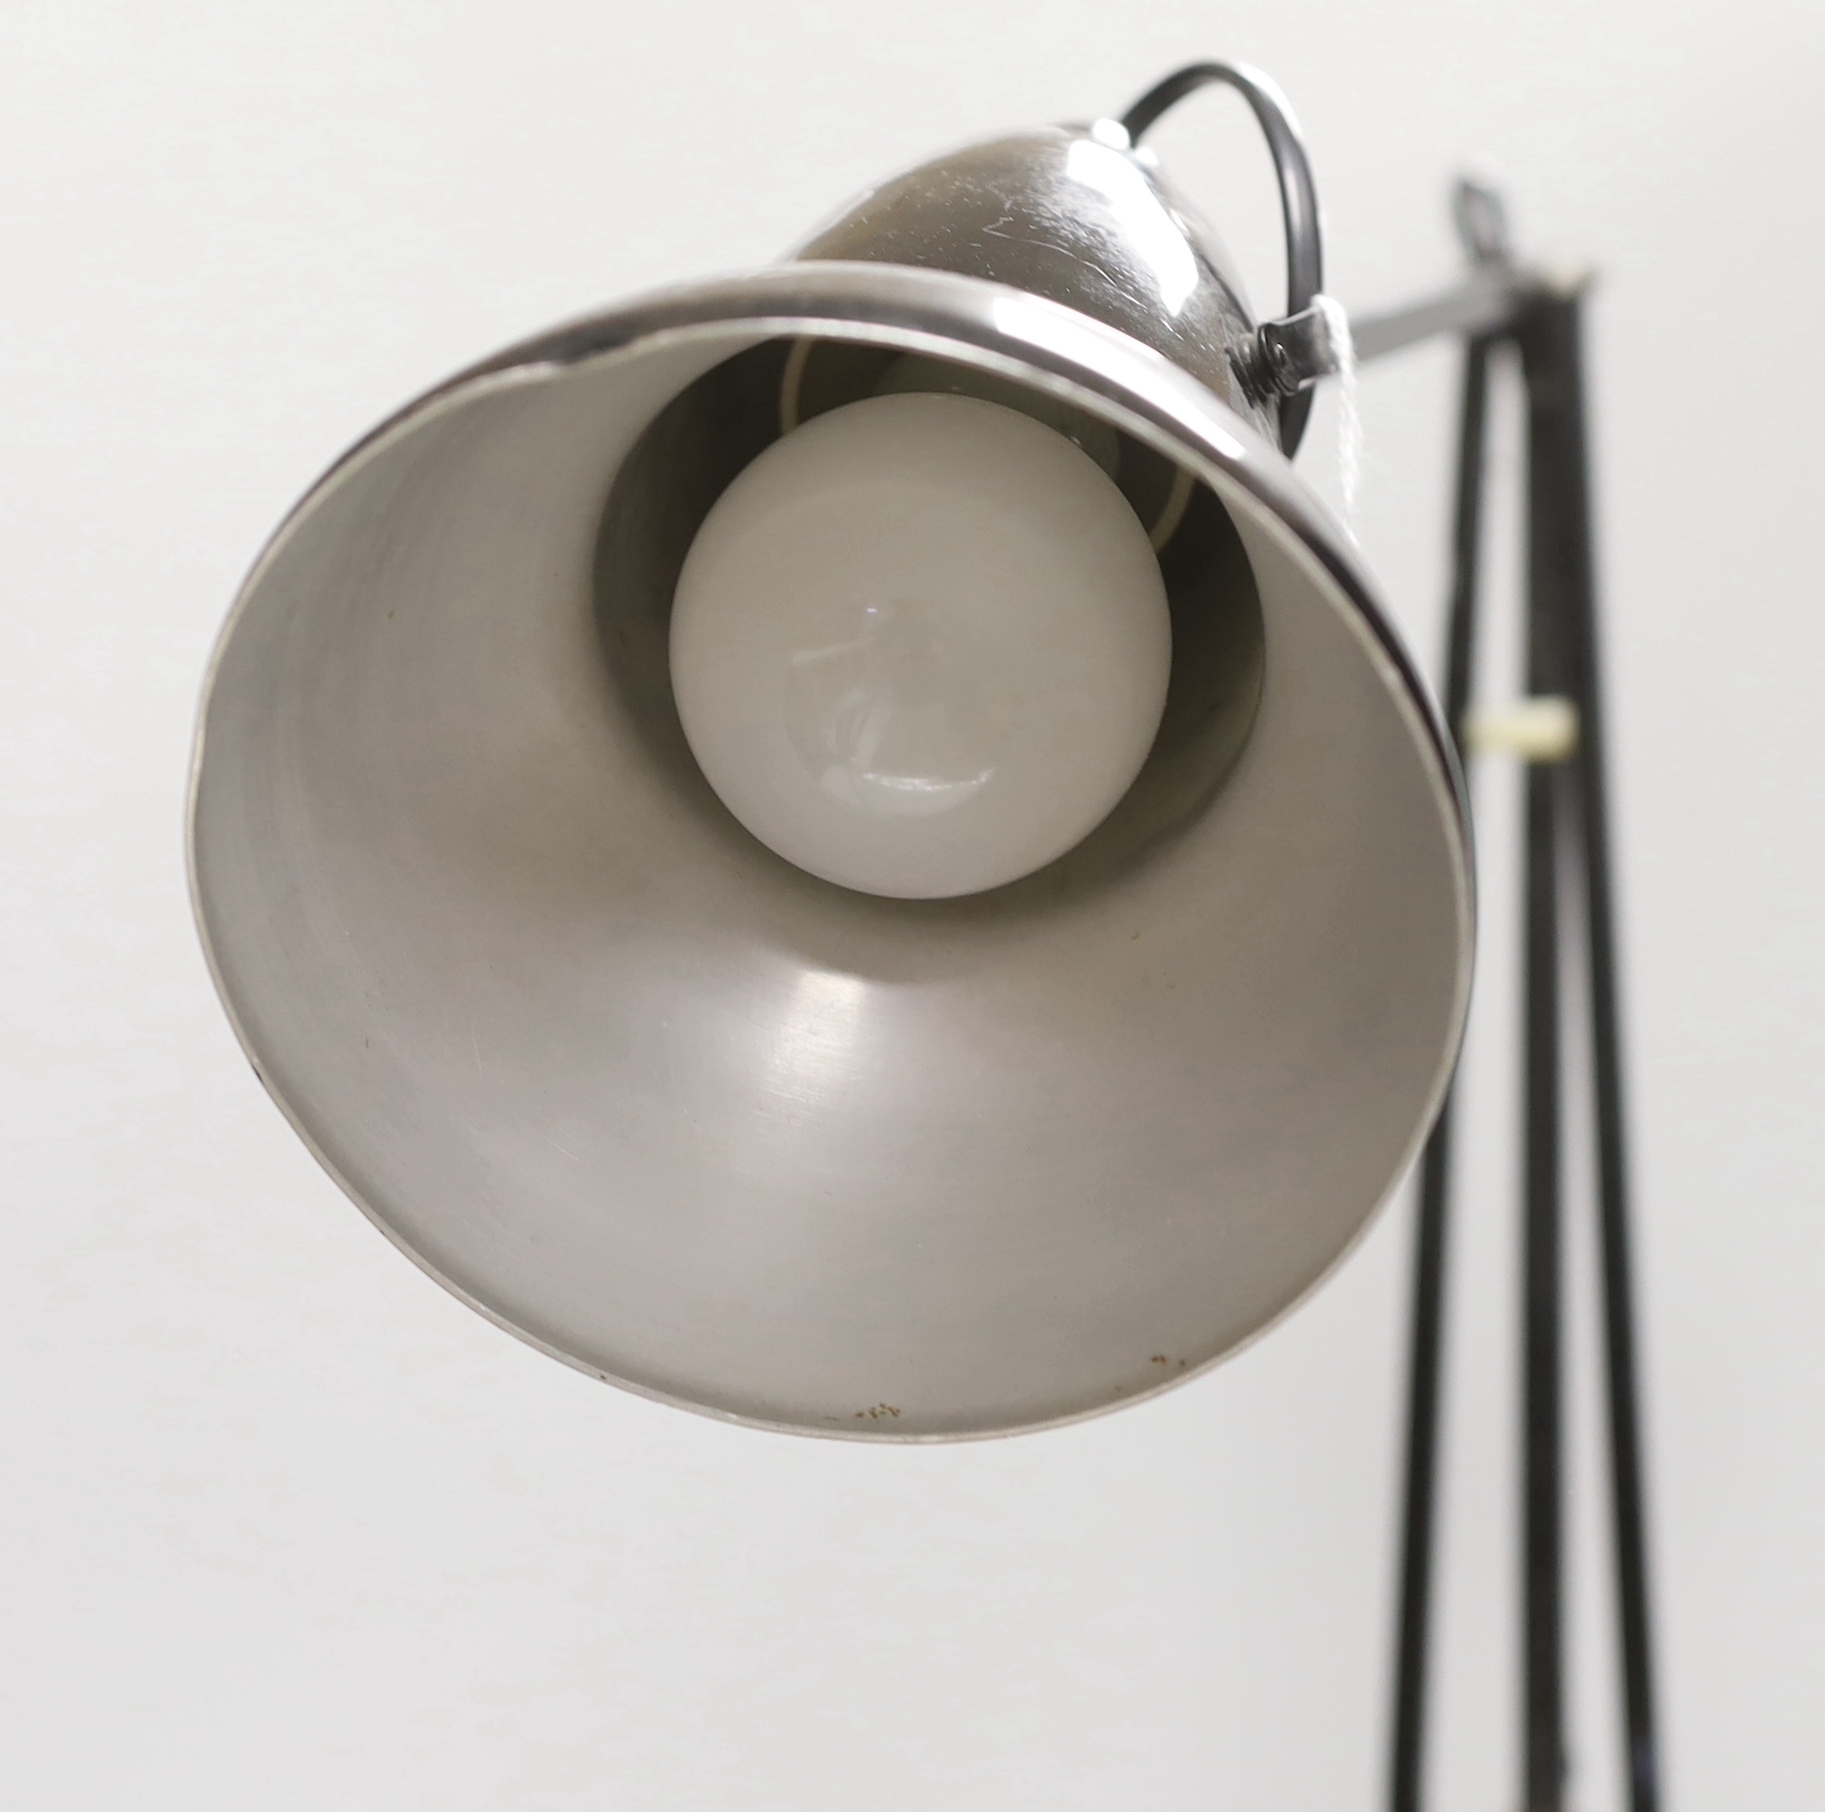 An anglepoise lamp - Image 3 of 4